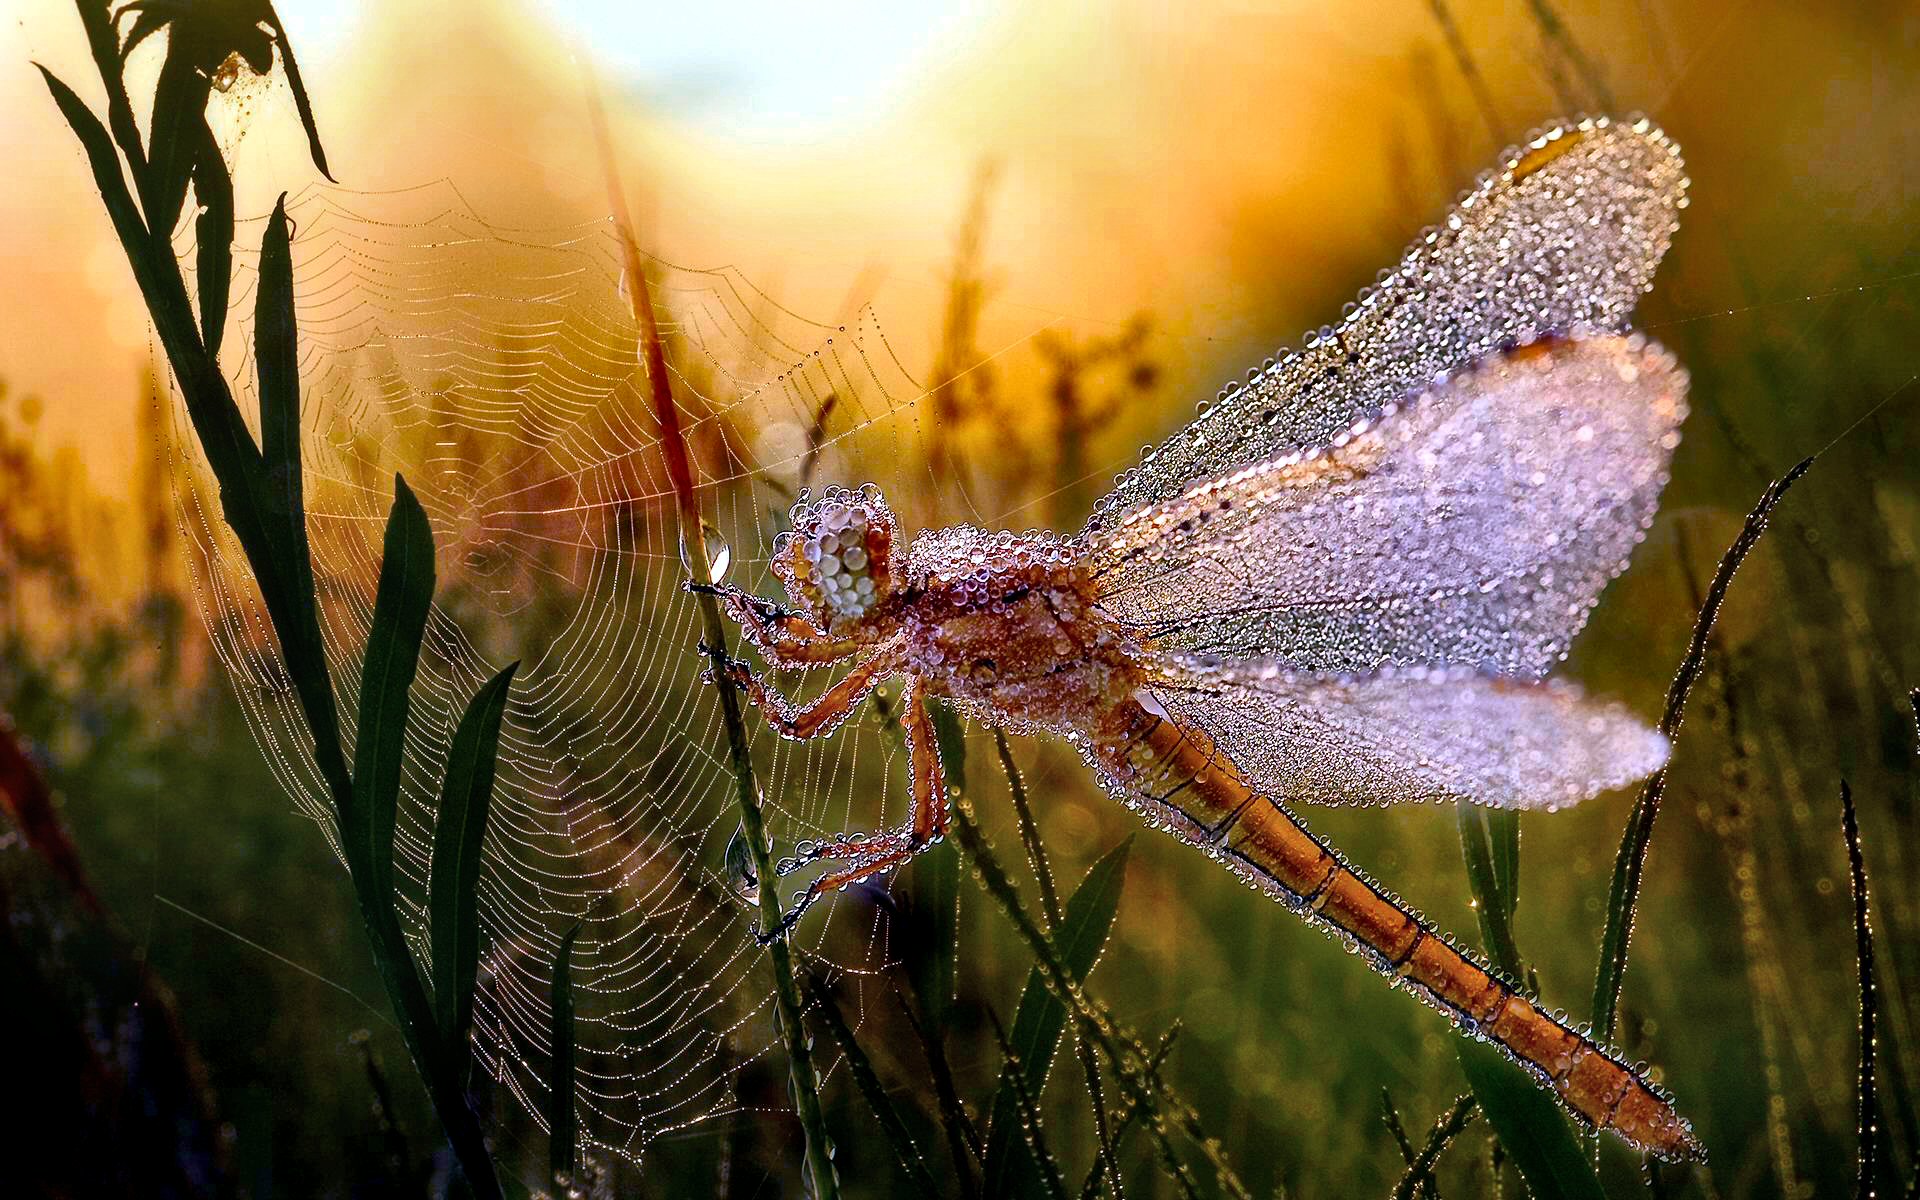 insect, morning, animal, dragonfly, dew, leaf, spider web, insects